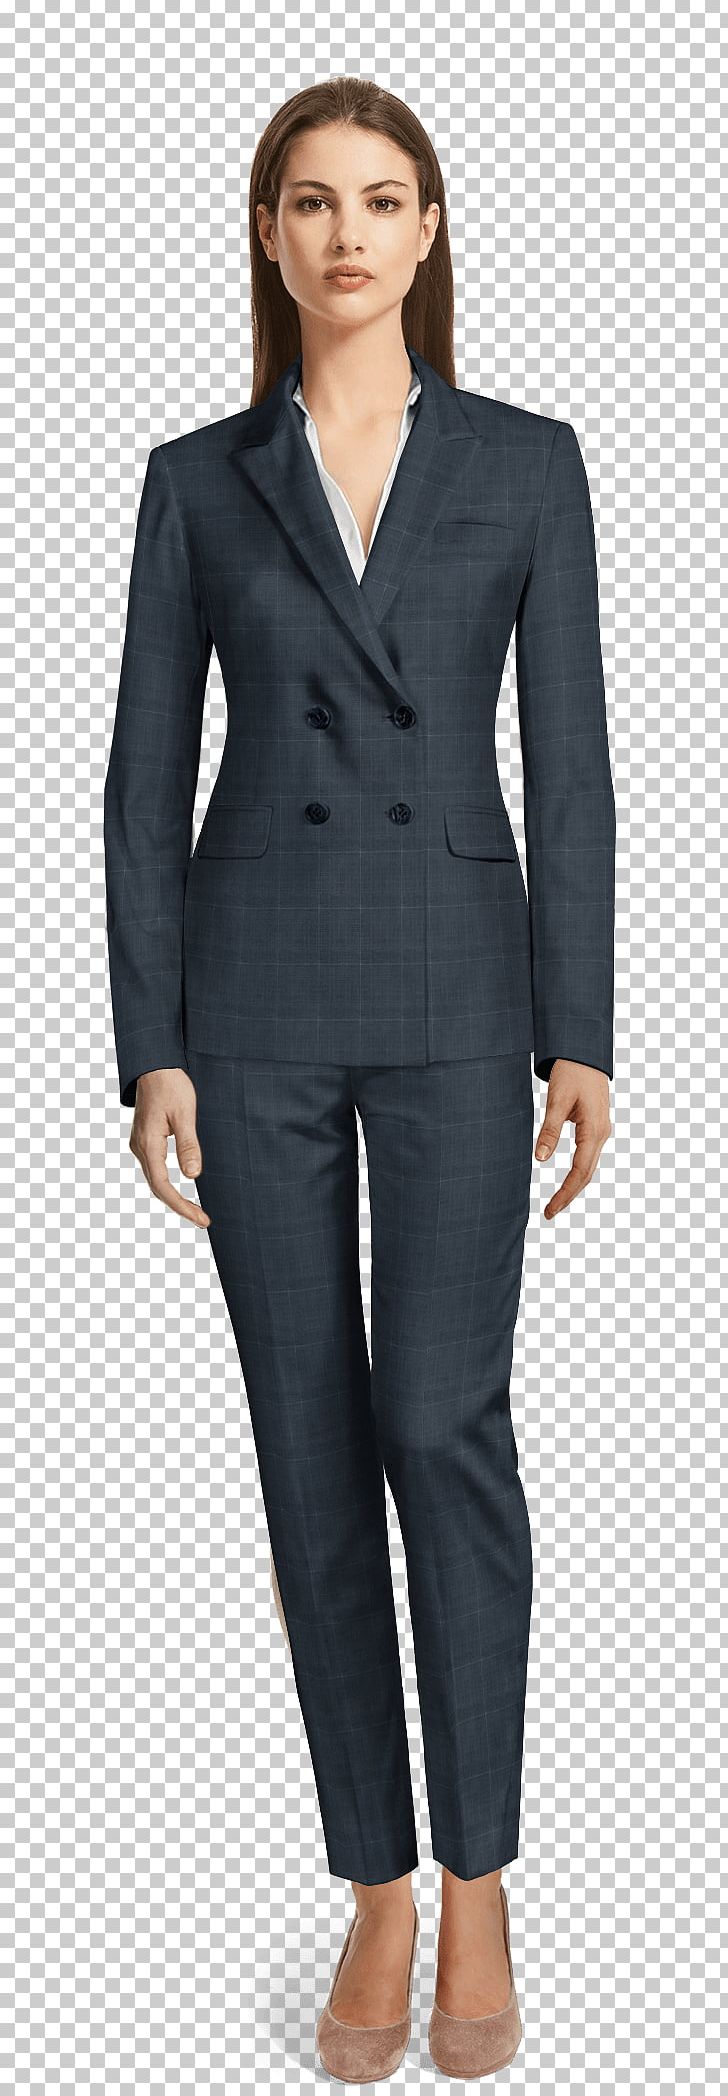 Pant Suits Double-breasted Clothing Blazer PNG, Clipart, Blouse, Businessperson, Clothing, Coat, Doublebreasted Free PNG Download